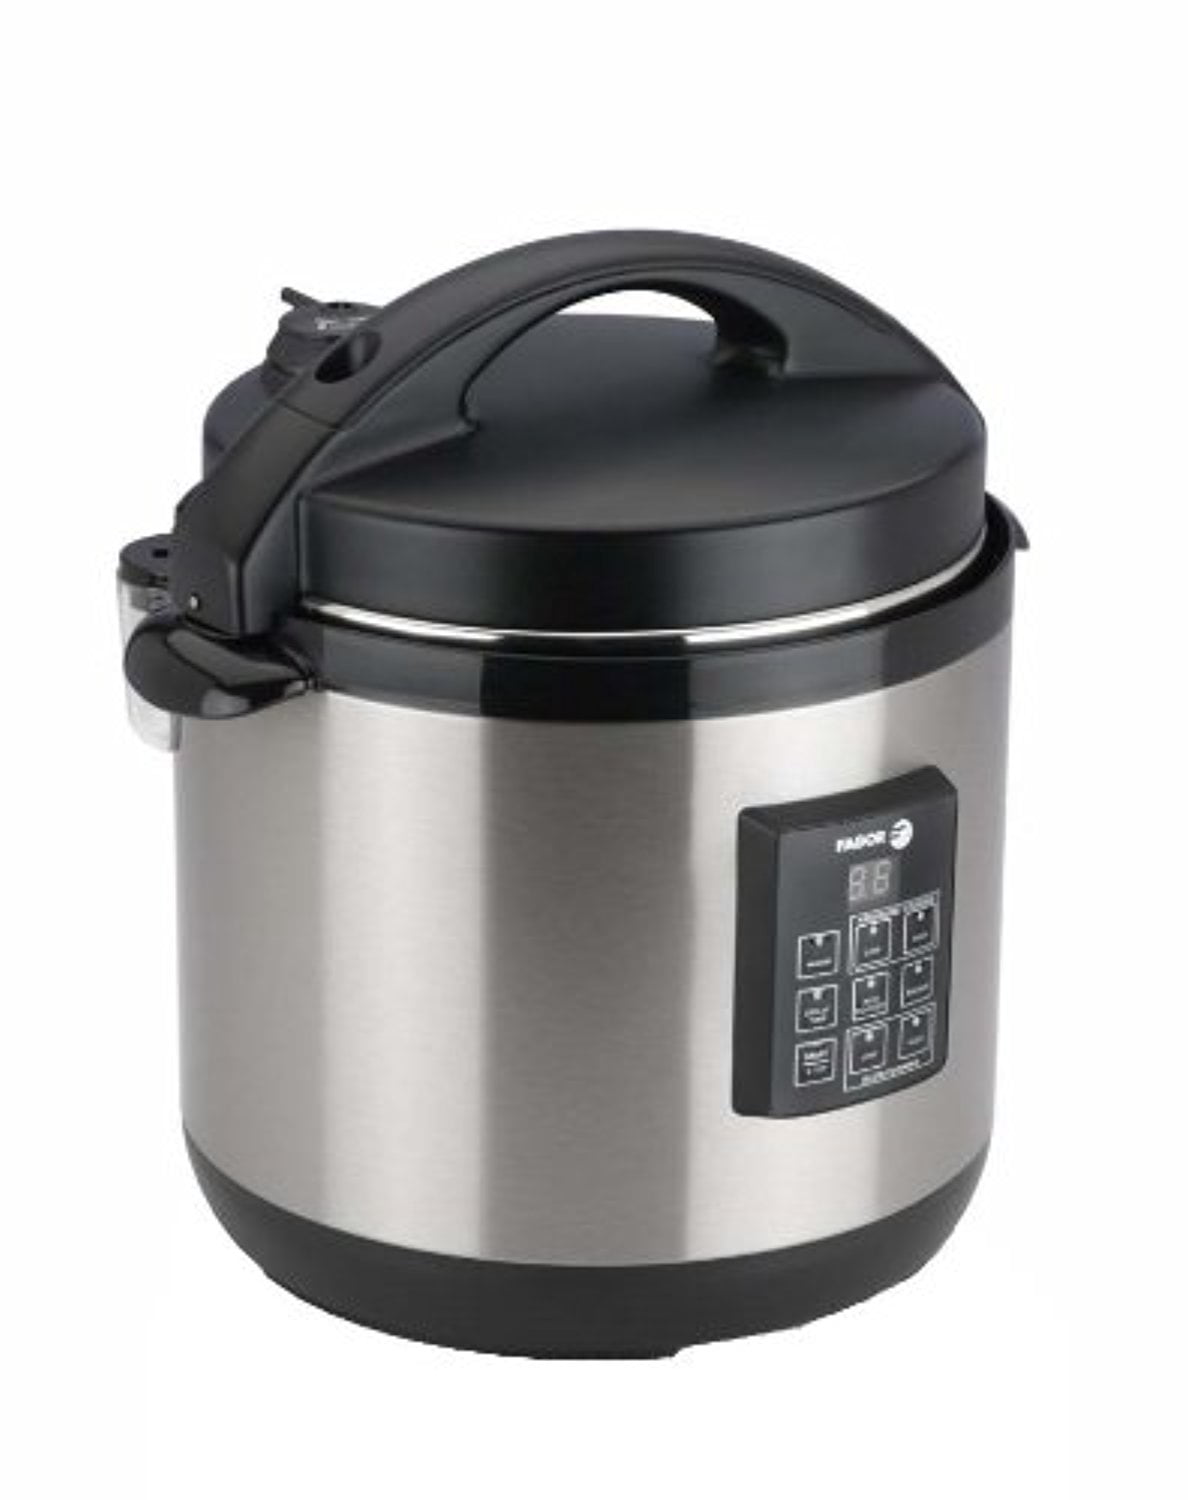 Fagor MultiRapid 6qt Pressure Cooker Stainless Steel, Fully Tested